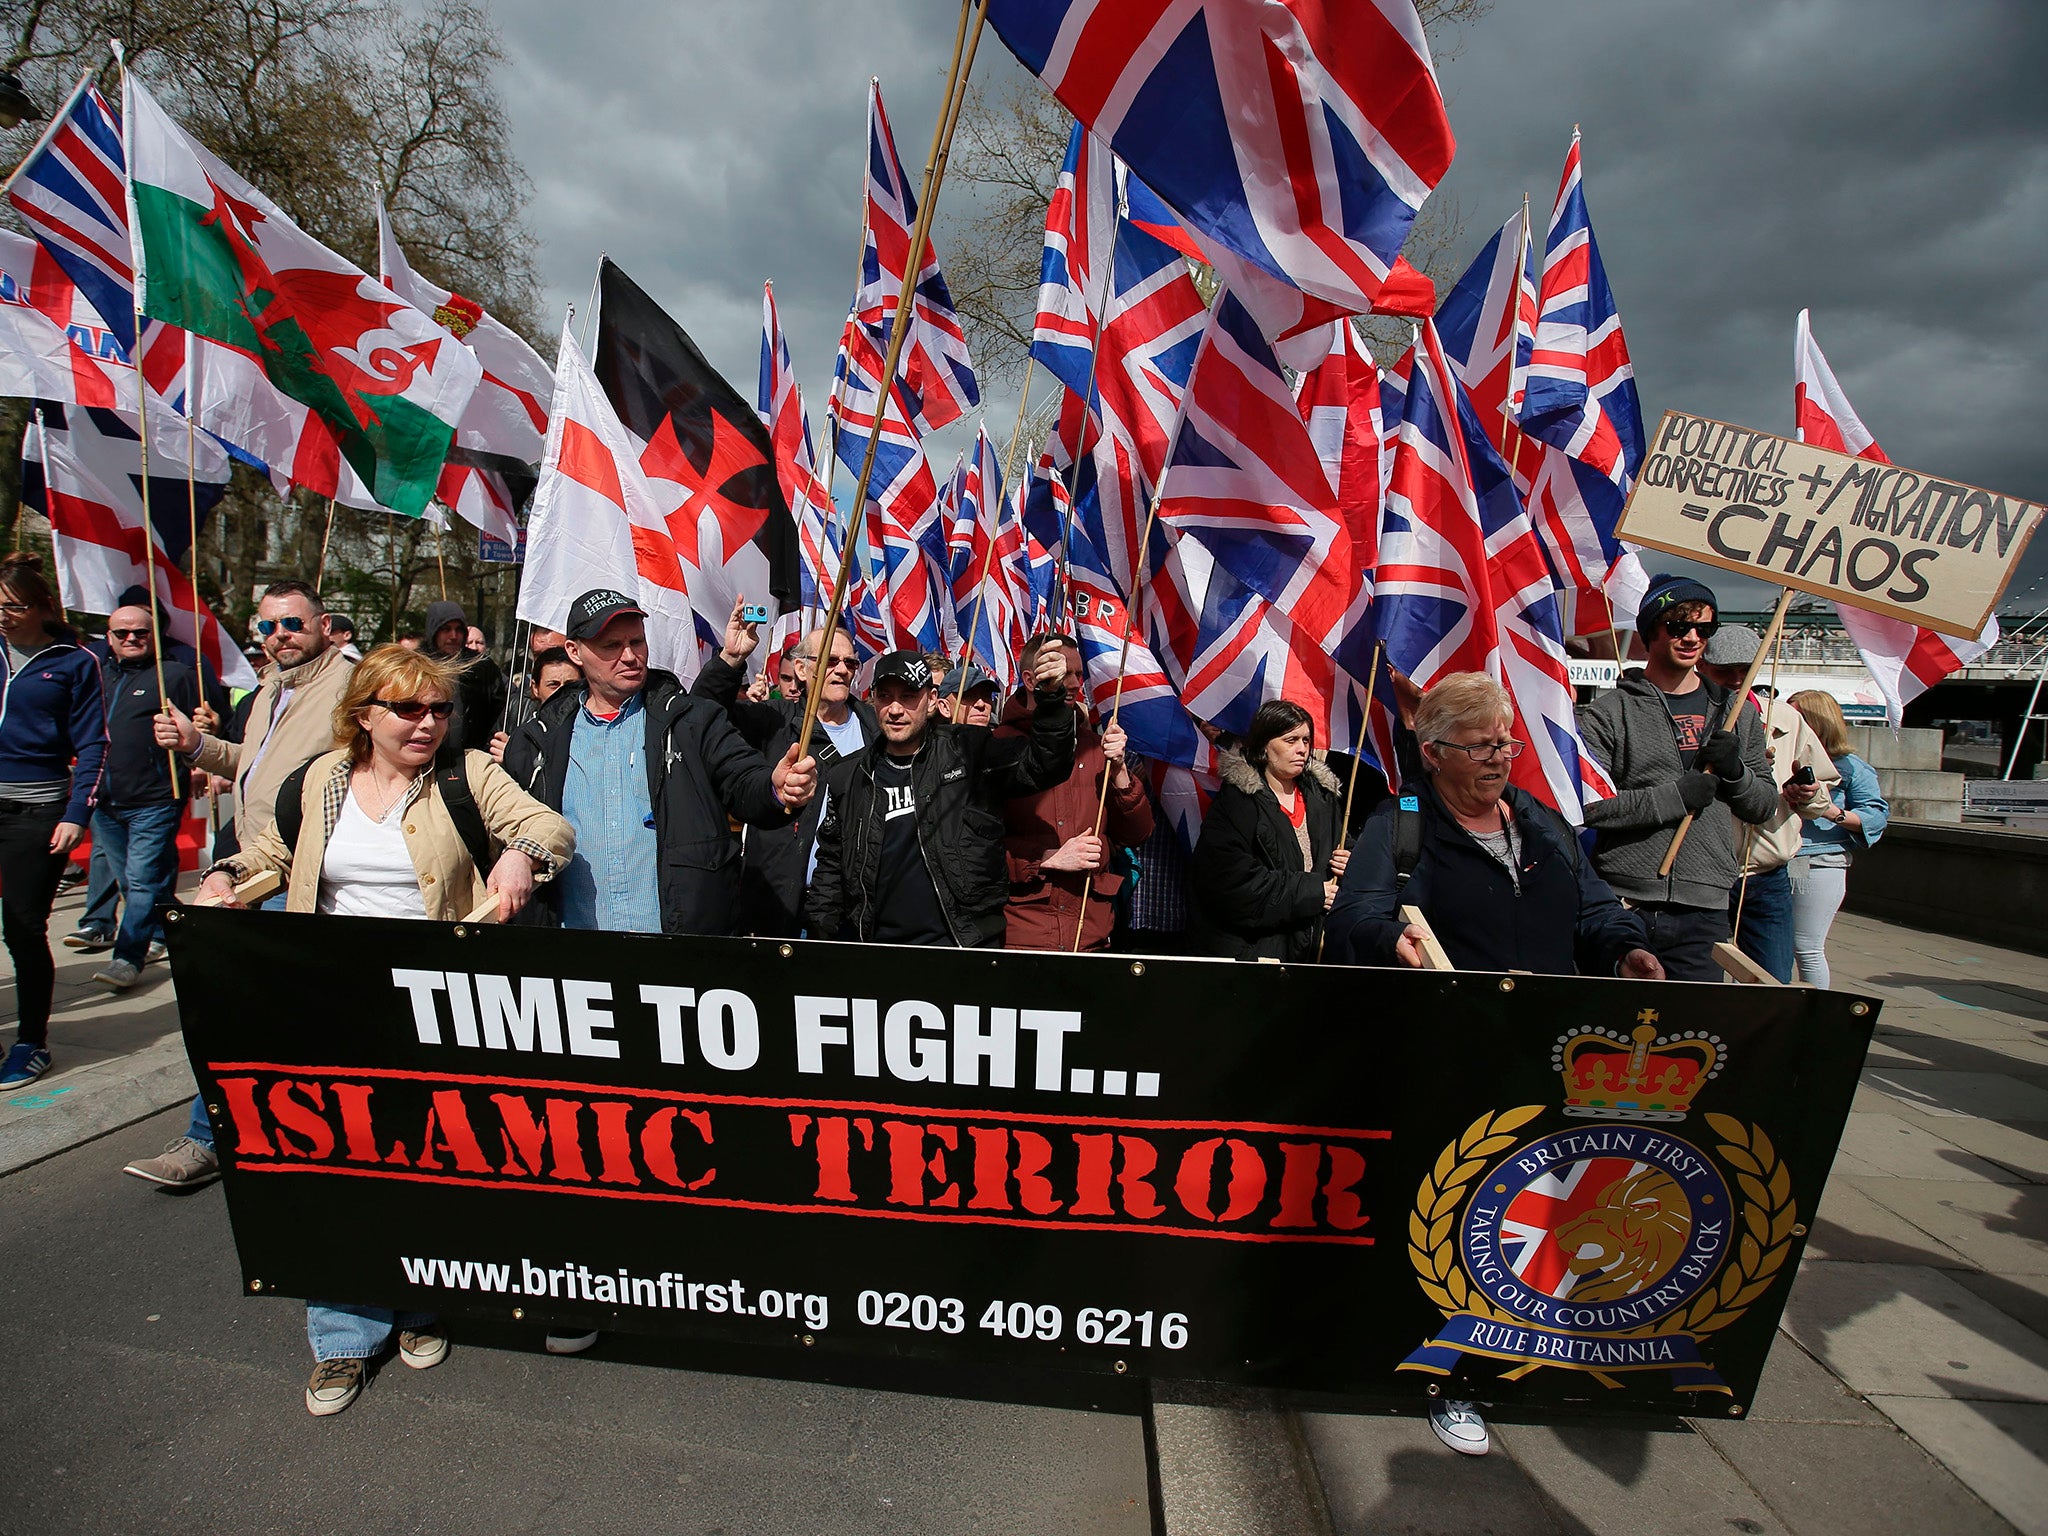 Members of the far-right group Britain First march with flags in central London on 1 April 2017, following the Westminster attack (AFP/Getty Images)